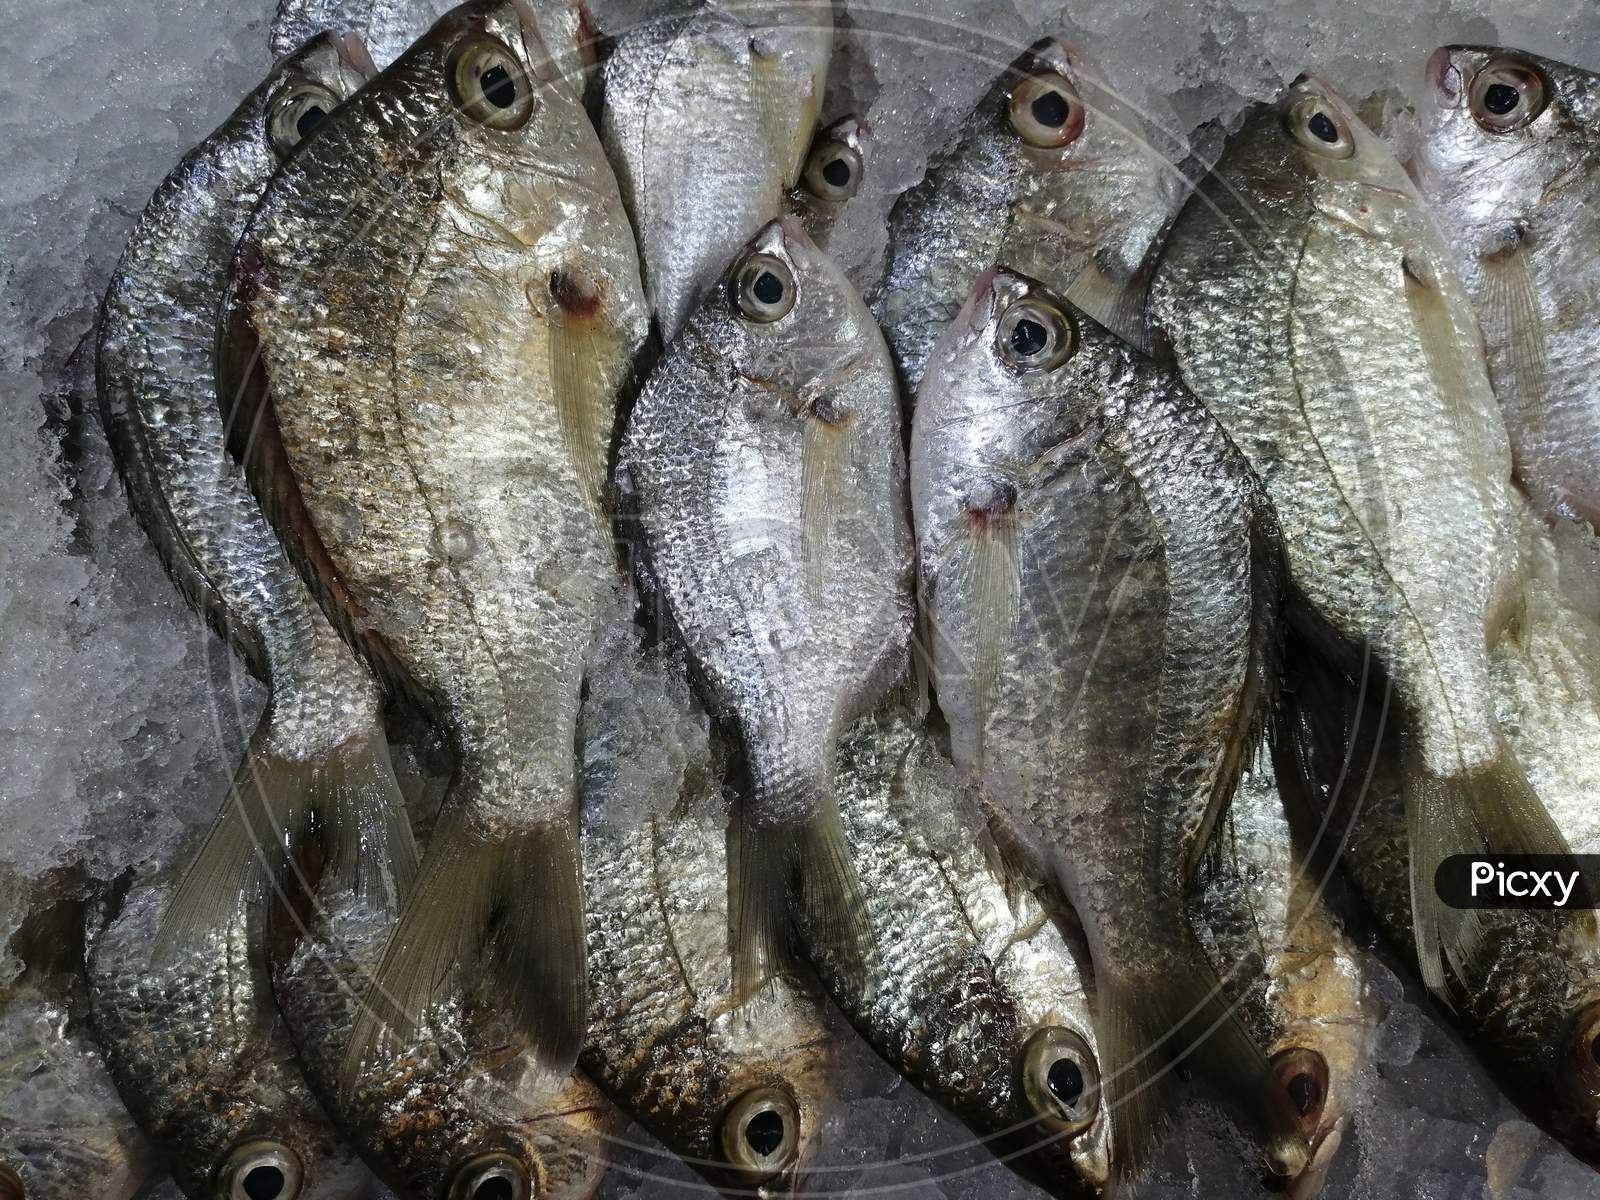 Payia Fish Which Is Fresh Kept For Sale